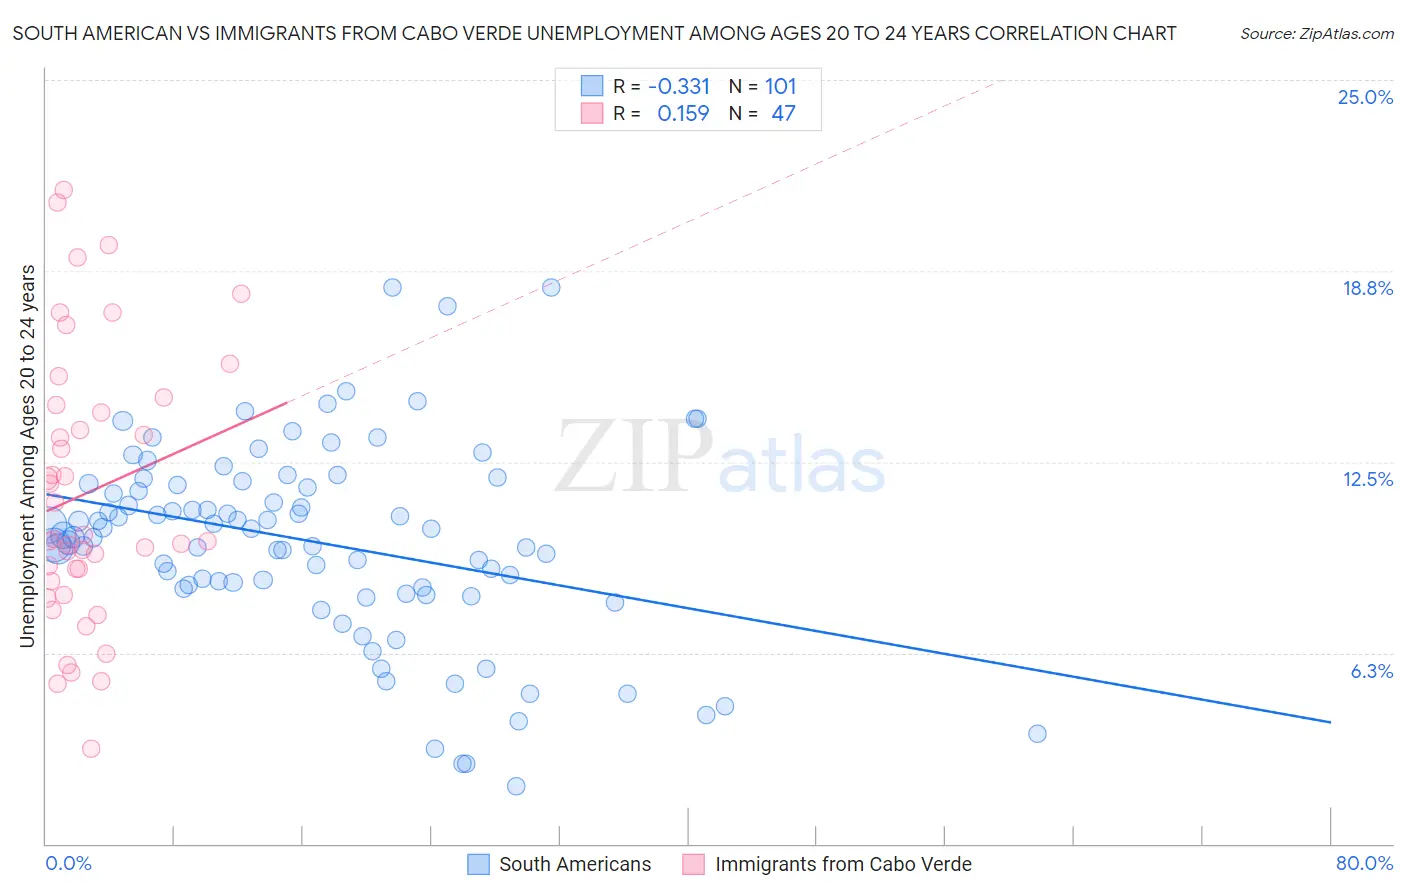 South American vs Immigrants from Cabo Verde Unemployment Among Ages 20 to 24 years